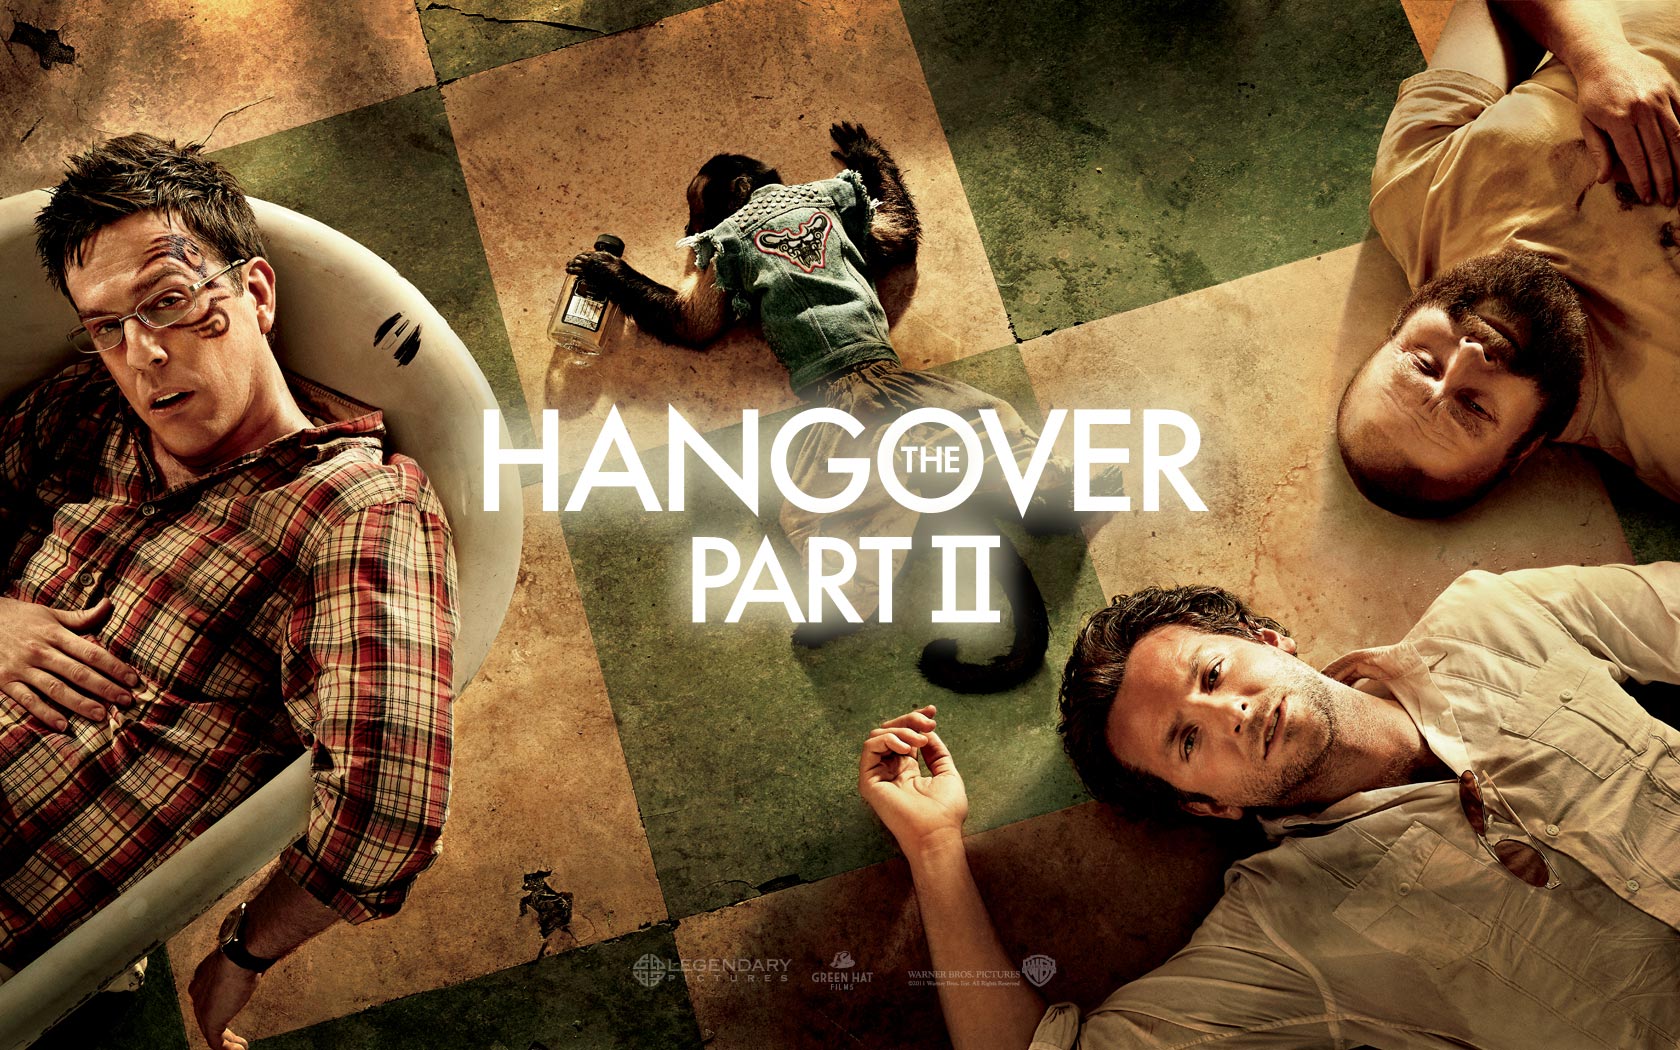 The Hangover Part II Backgrounds, Compatible - PC, Mobile, Gadgets| 1680x1050 px